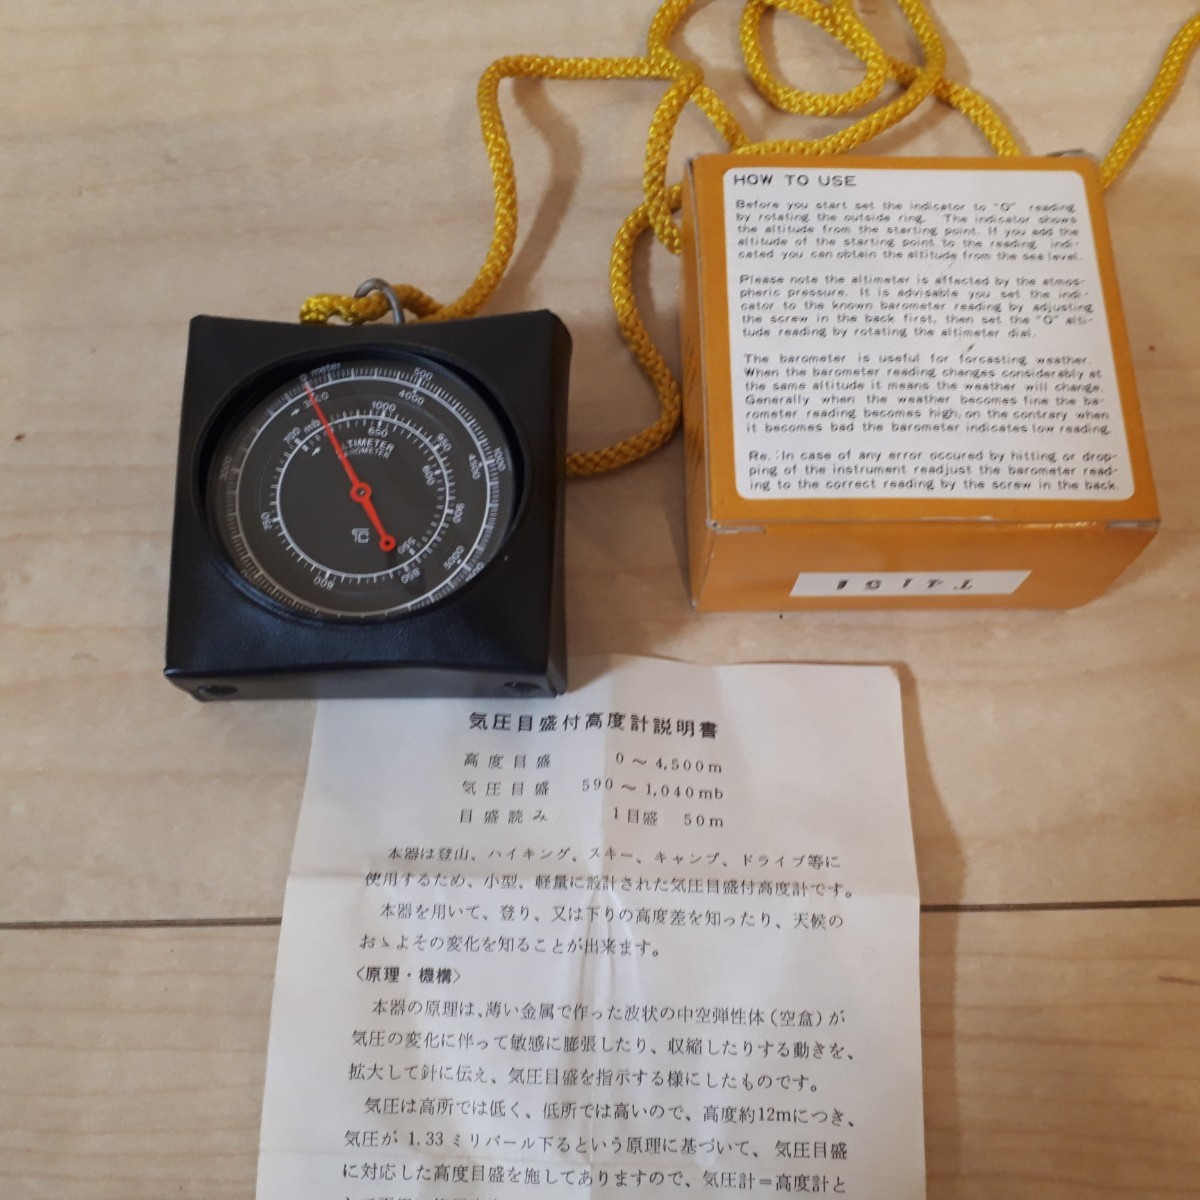 [ free shipping ]EVER - TRUST TRAVELAID No. 1210 compass both sides type curvimeter ALTIMETER BAROMETER atmospheric pressure scale attaching altimeter set mountain climbing rare 